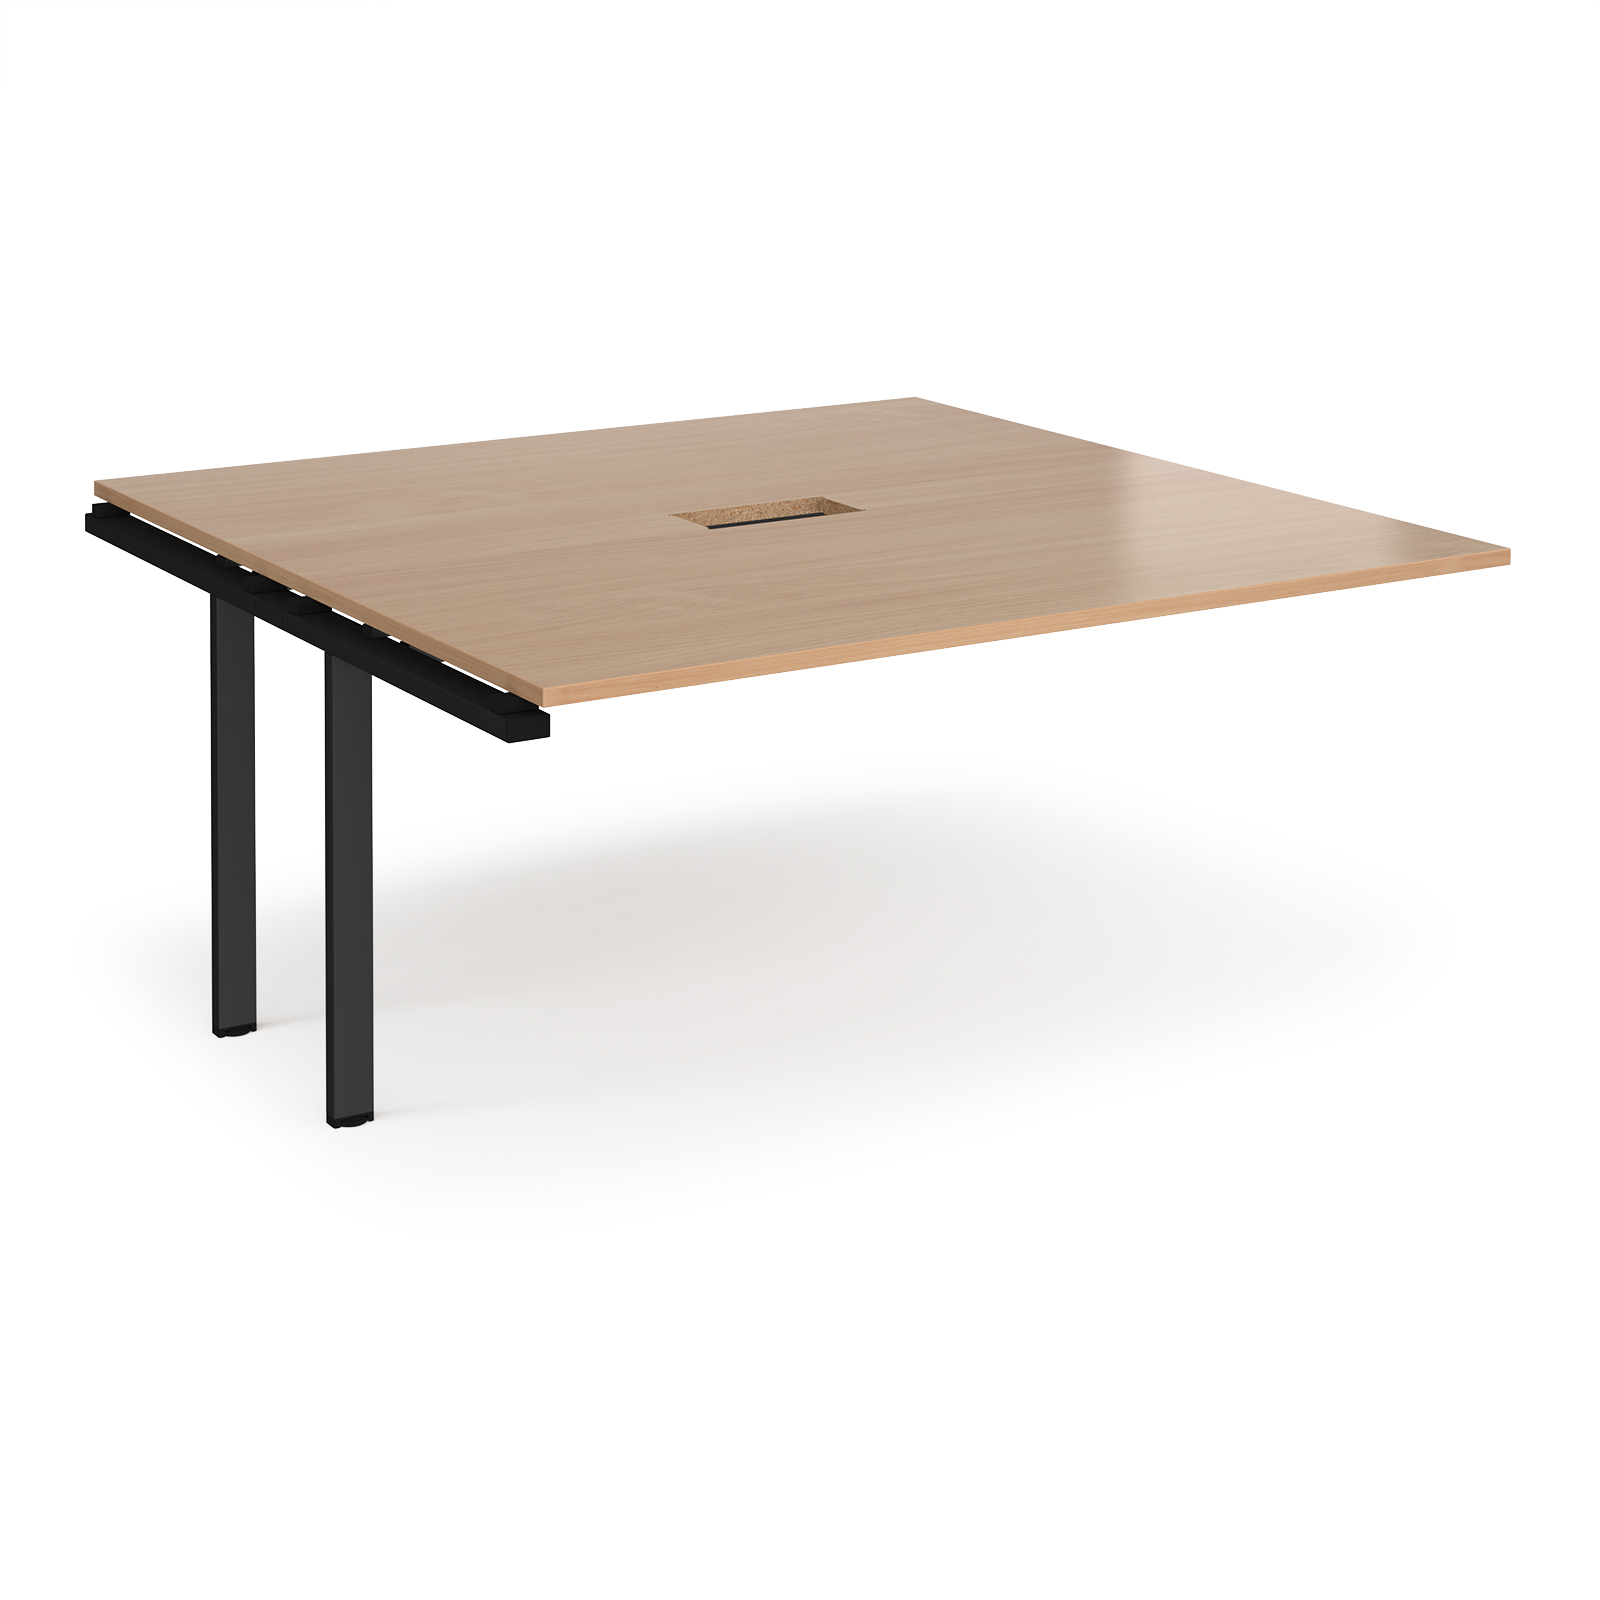 Adapt boardroom table add on unit 1600mm x 1600mm with central cutout 272mm x 132mm - black frame, beech top